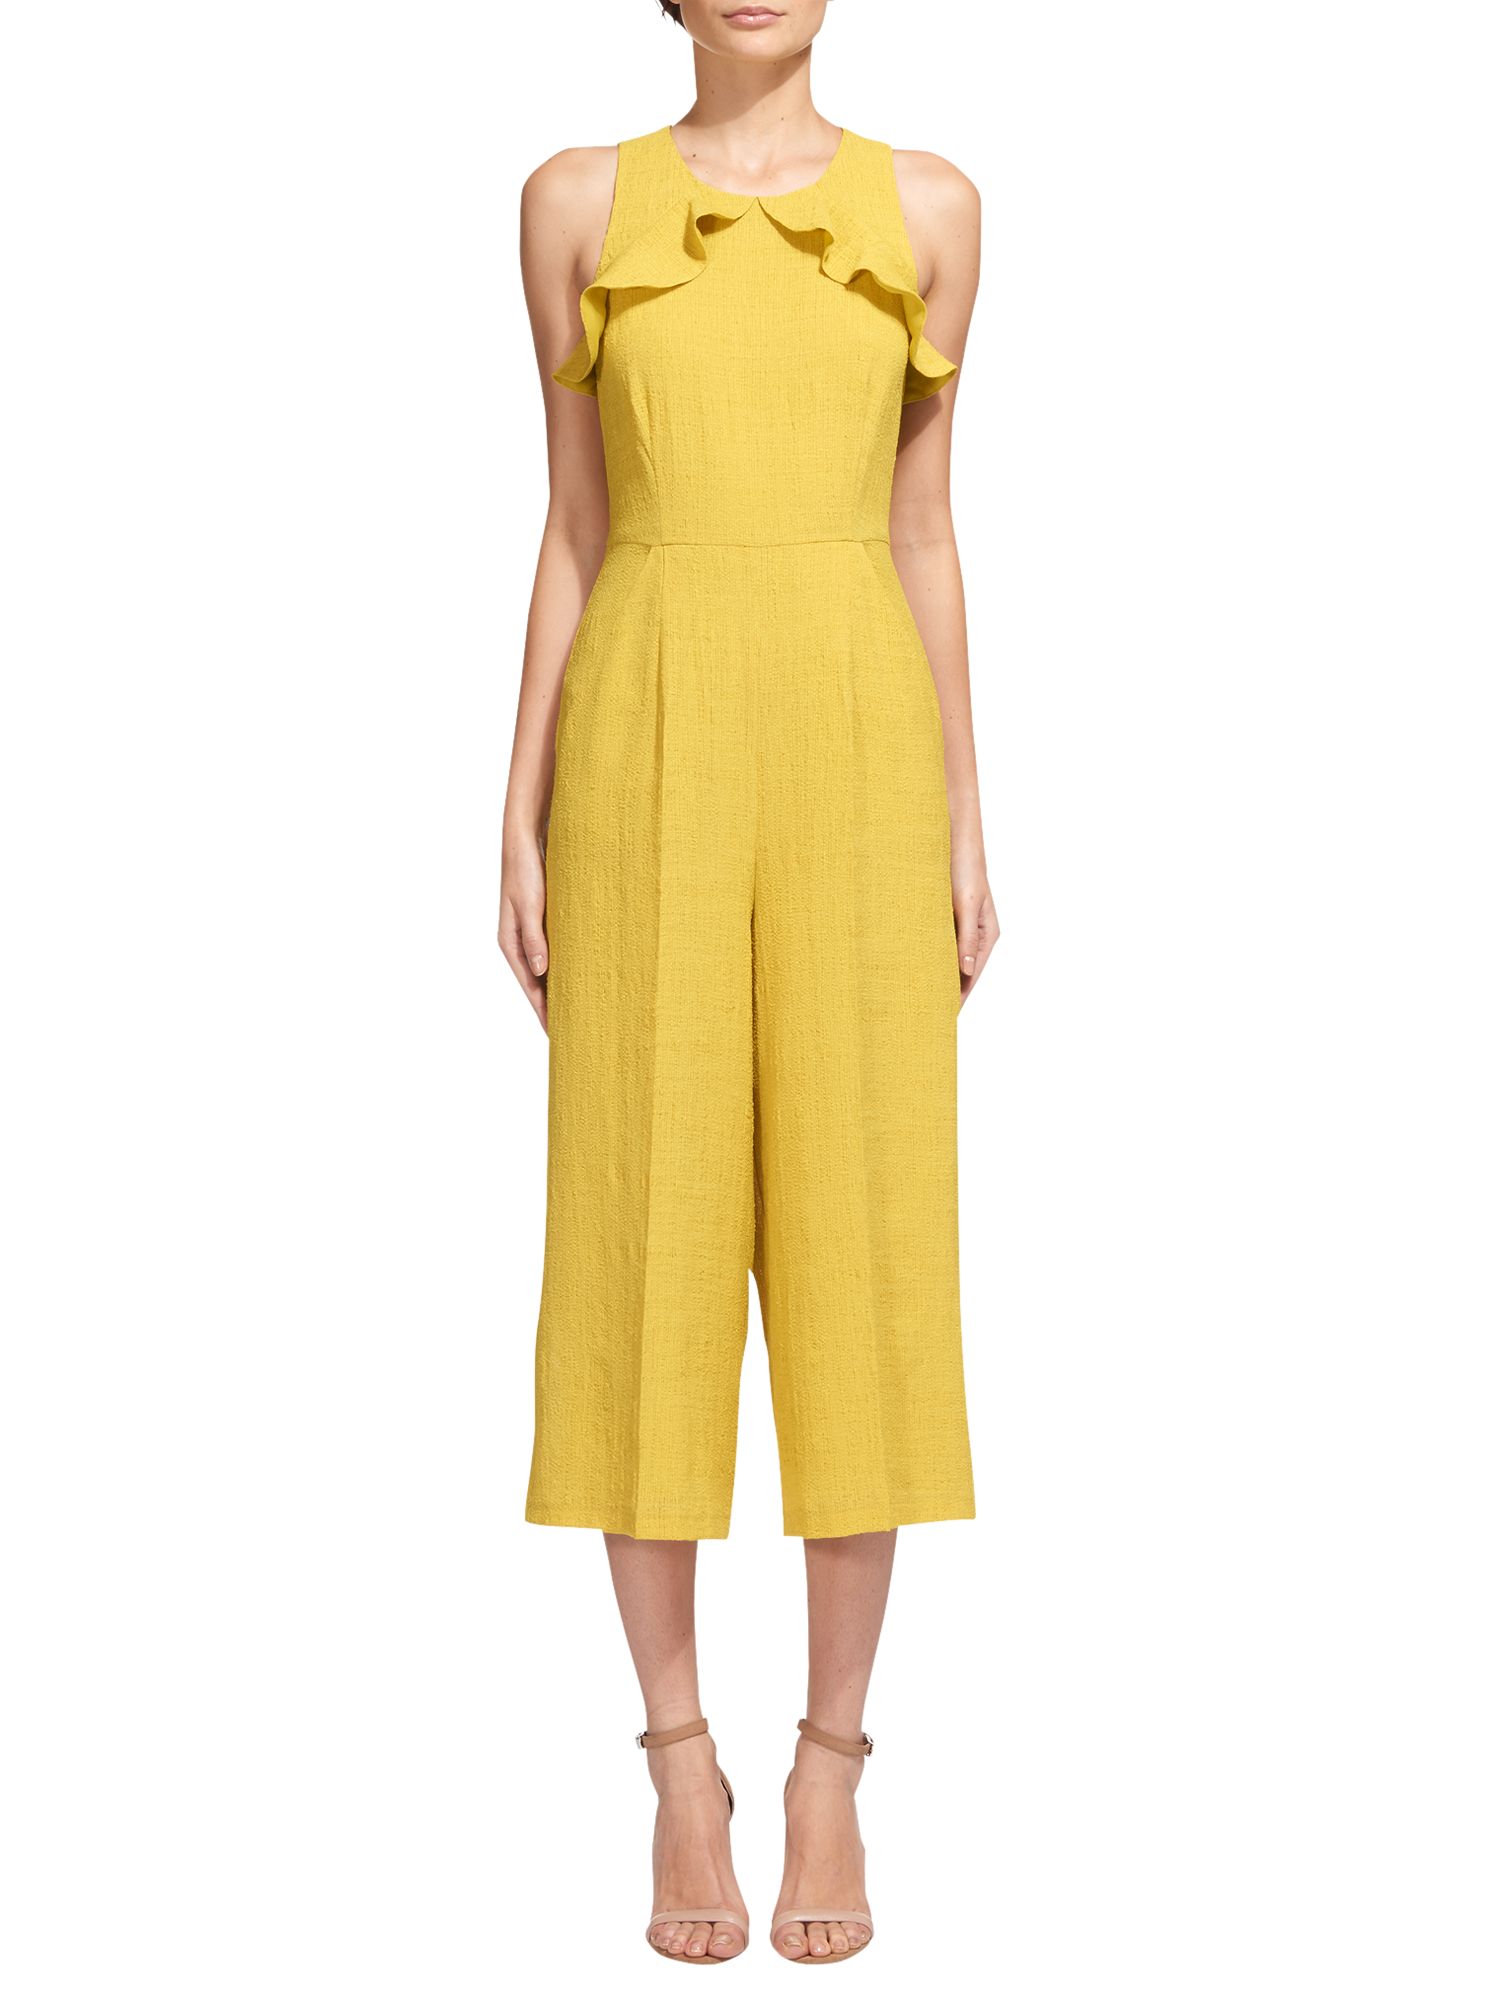 Whistles Mae Frill Detail Jumpsuit, Yellow, 12